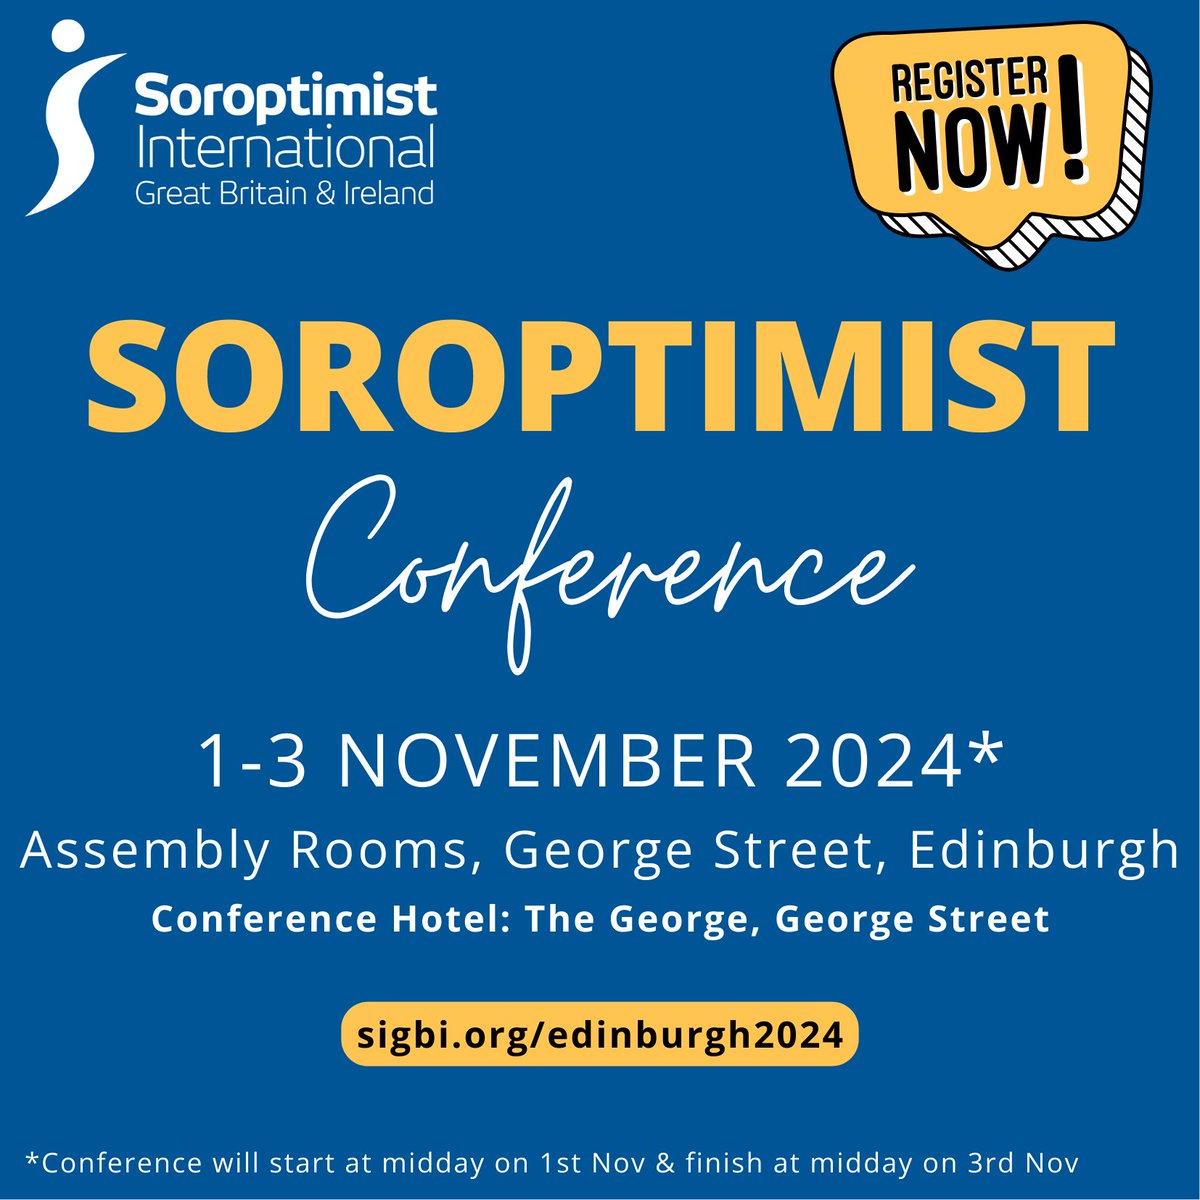 👏 EXCITING NEWS!!!! Registration for the #SoroptimistEdinburgh2024 Conference is now OPEN. Book your ticket here thehub.sigbi.org/events. Further information about the conference and what to do in Edinburgh is on the conference website: sigbi.org/edinburgh2024.